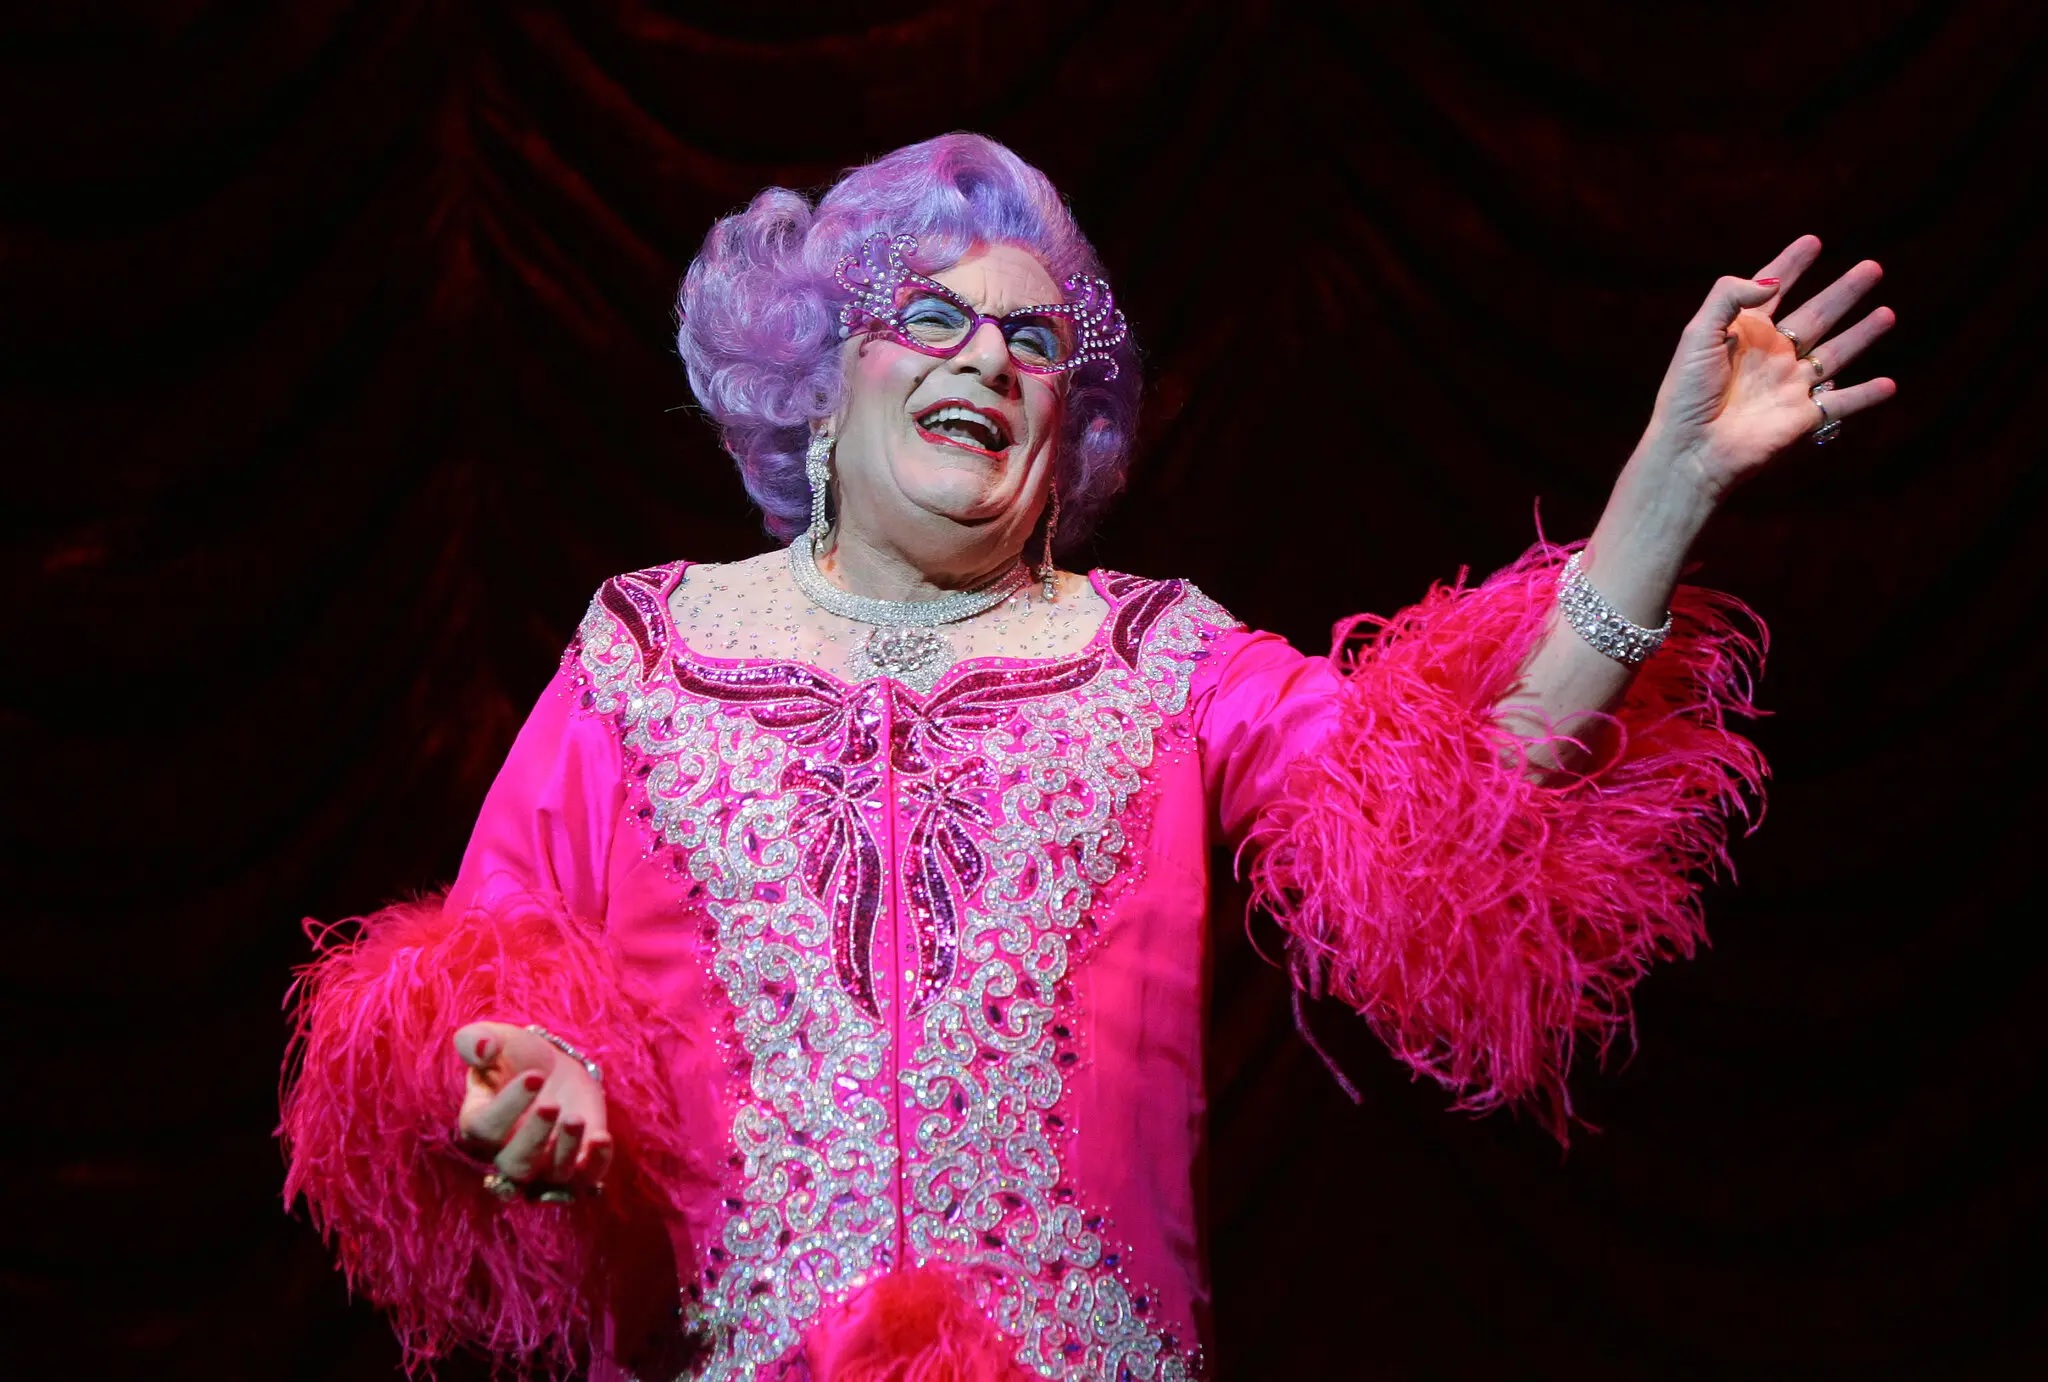 Dame Edna is best known for her appearance on Barry Humphries' on-stage show.